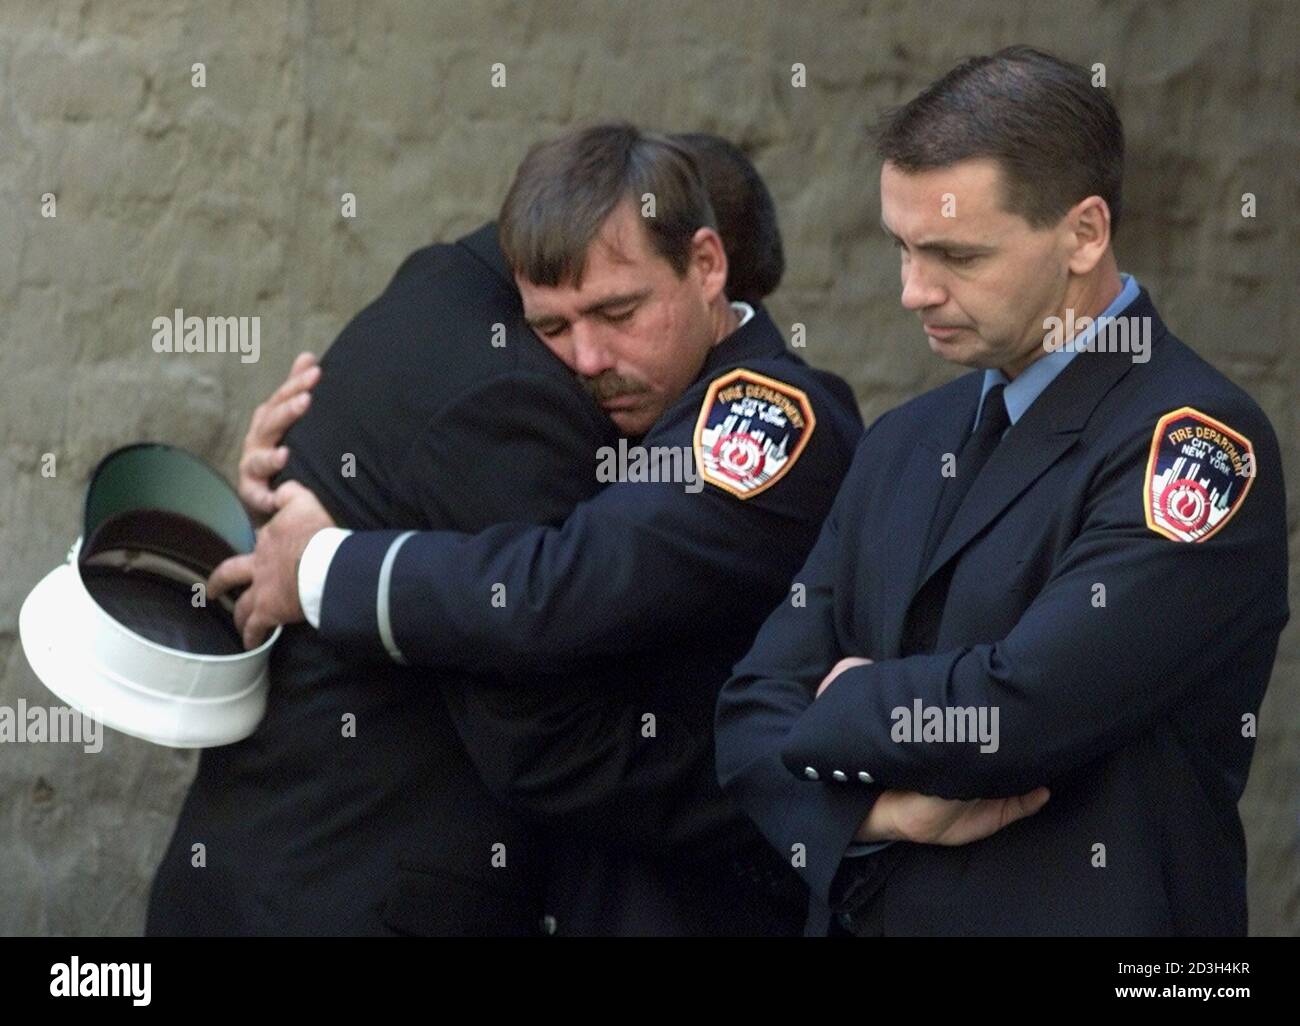 Fire fighters from Ladder Company 24 Engine 1 embrace outside of St. Francis of Assisi Church following the funeral of New York Fire Department Chaplain Reverand Mychal Judge in New York September 15, 2001. Chaplain Judge died while giving last rites to a fallen fire fighter after the collapse of the World Trade Center September 11. REUTERS/Rick Wilking  GMH/ME Stock Photo